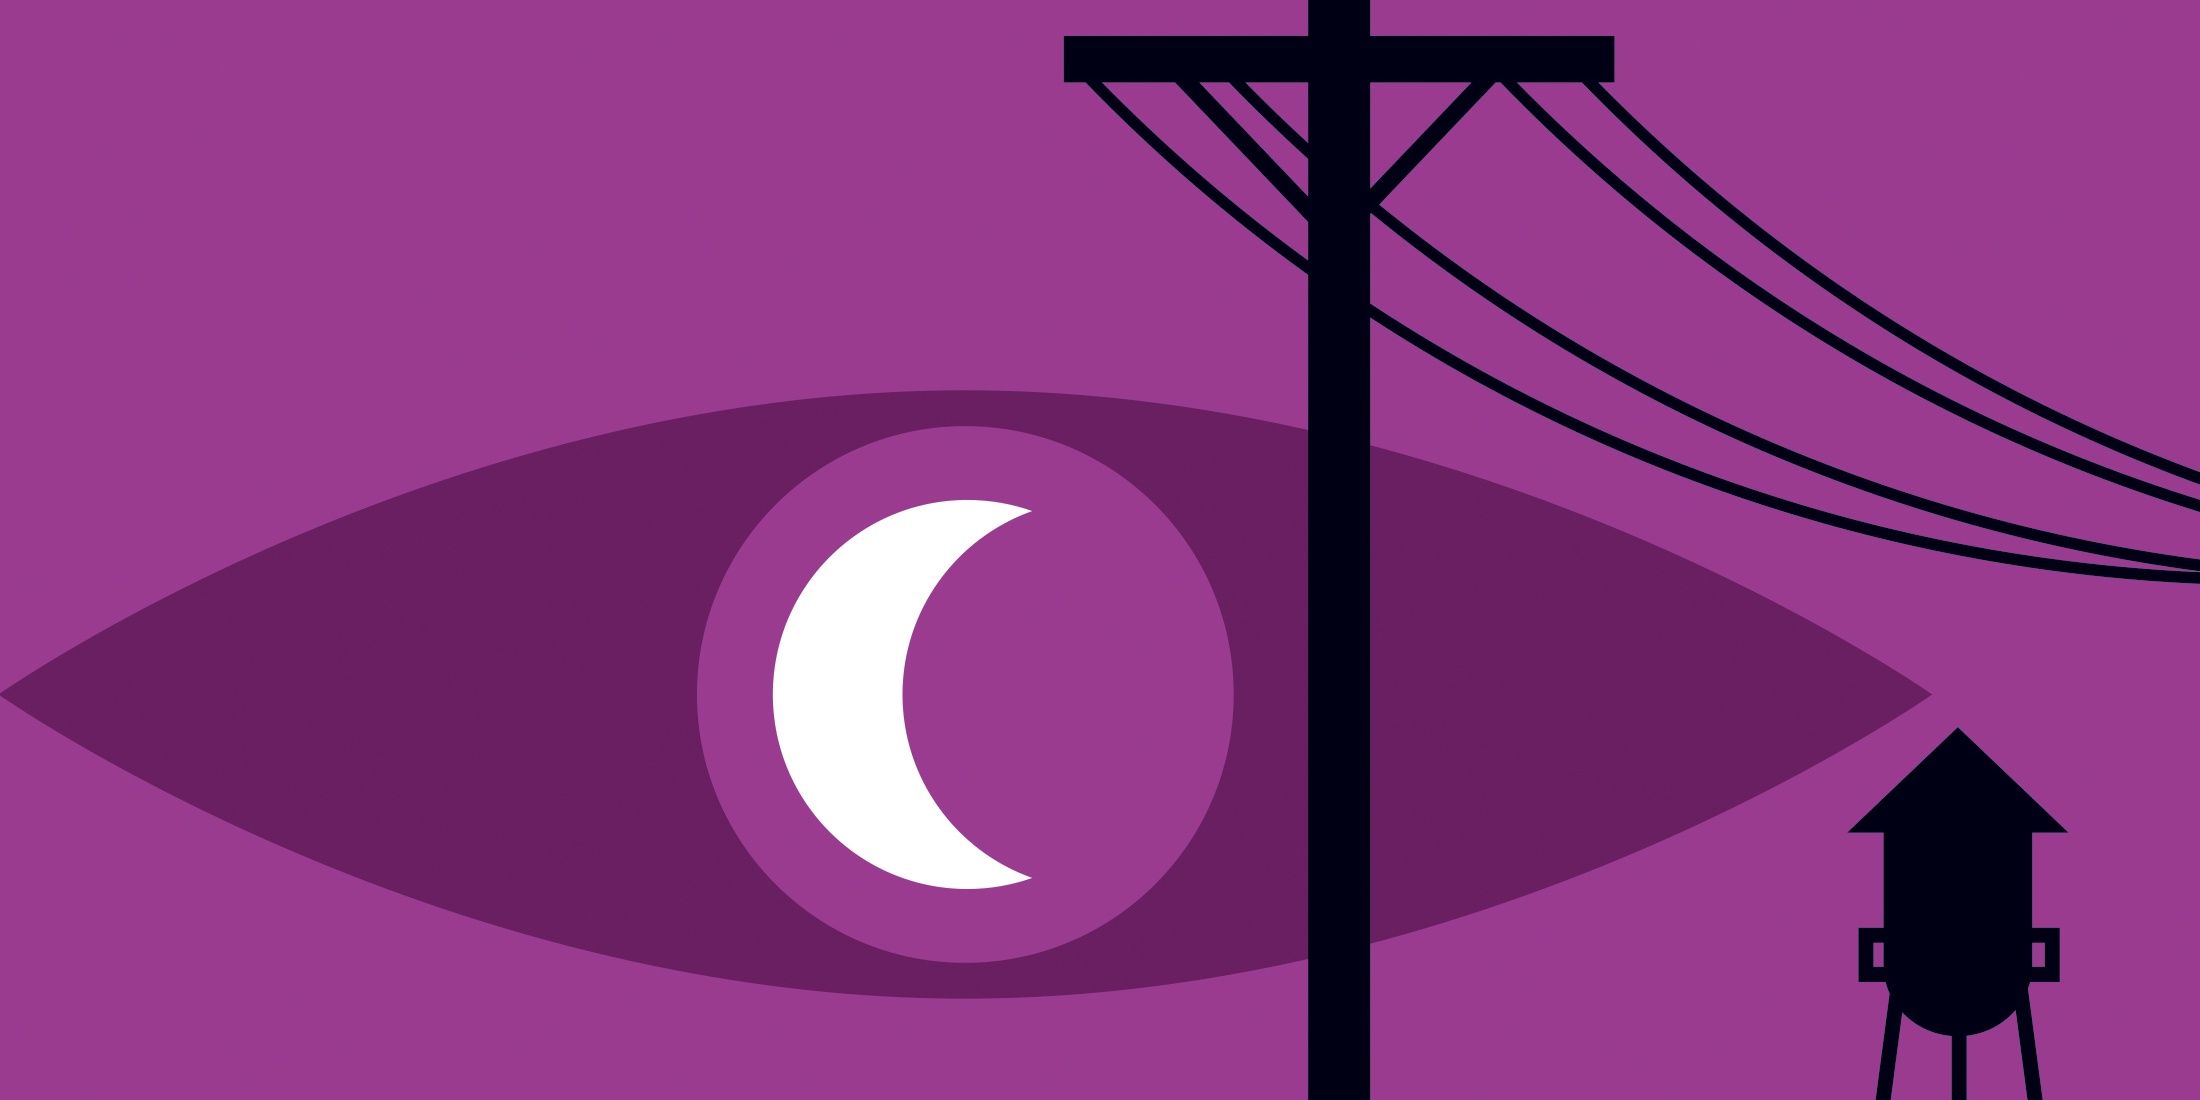 Welcome to Night Vale podcast of purple town background